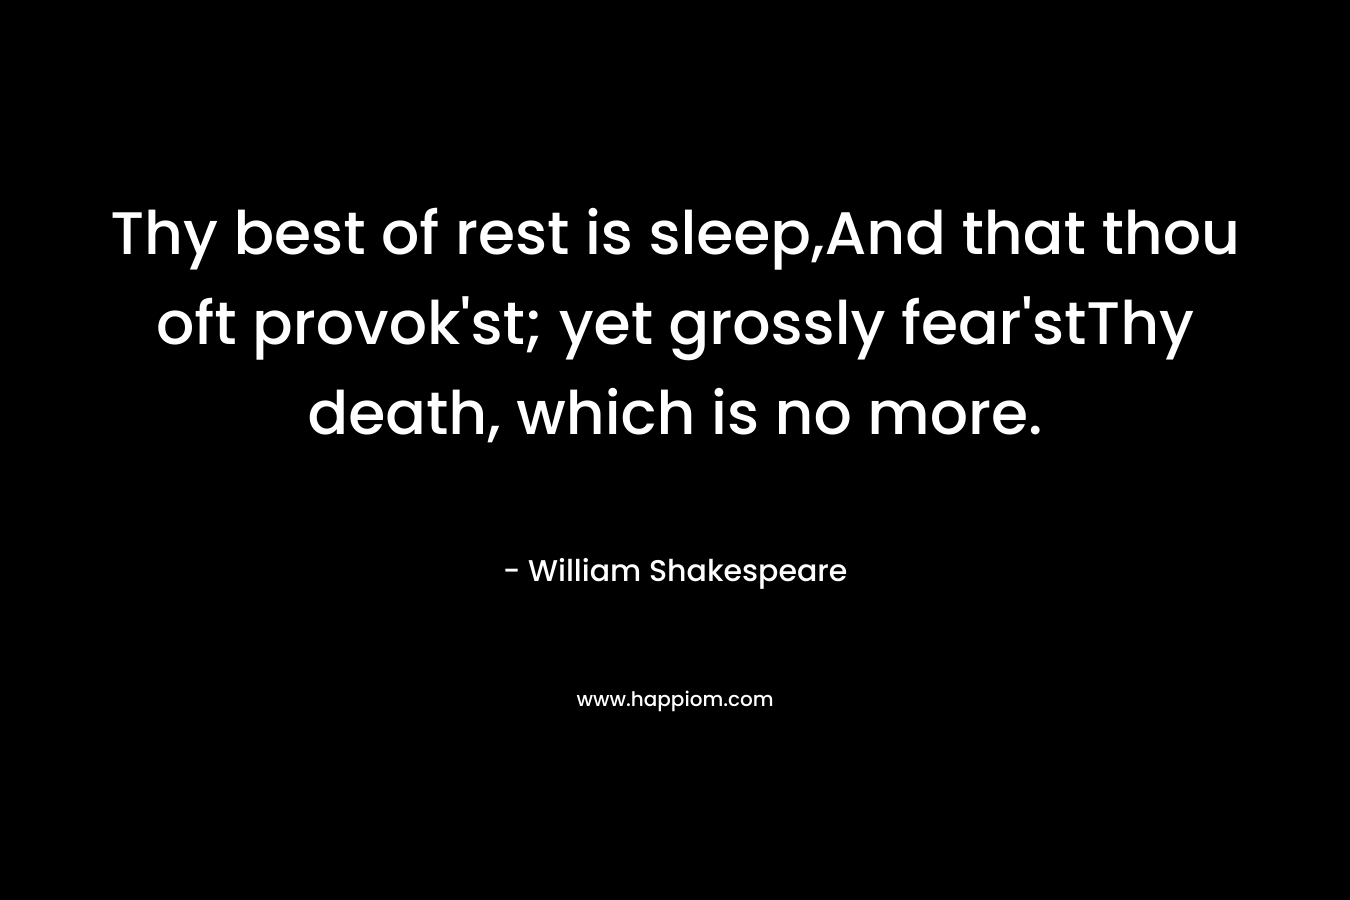 Thy best of rest is sleep,And that thou oft provok'st; yet grossly fear'stThy death, which is no more.